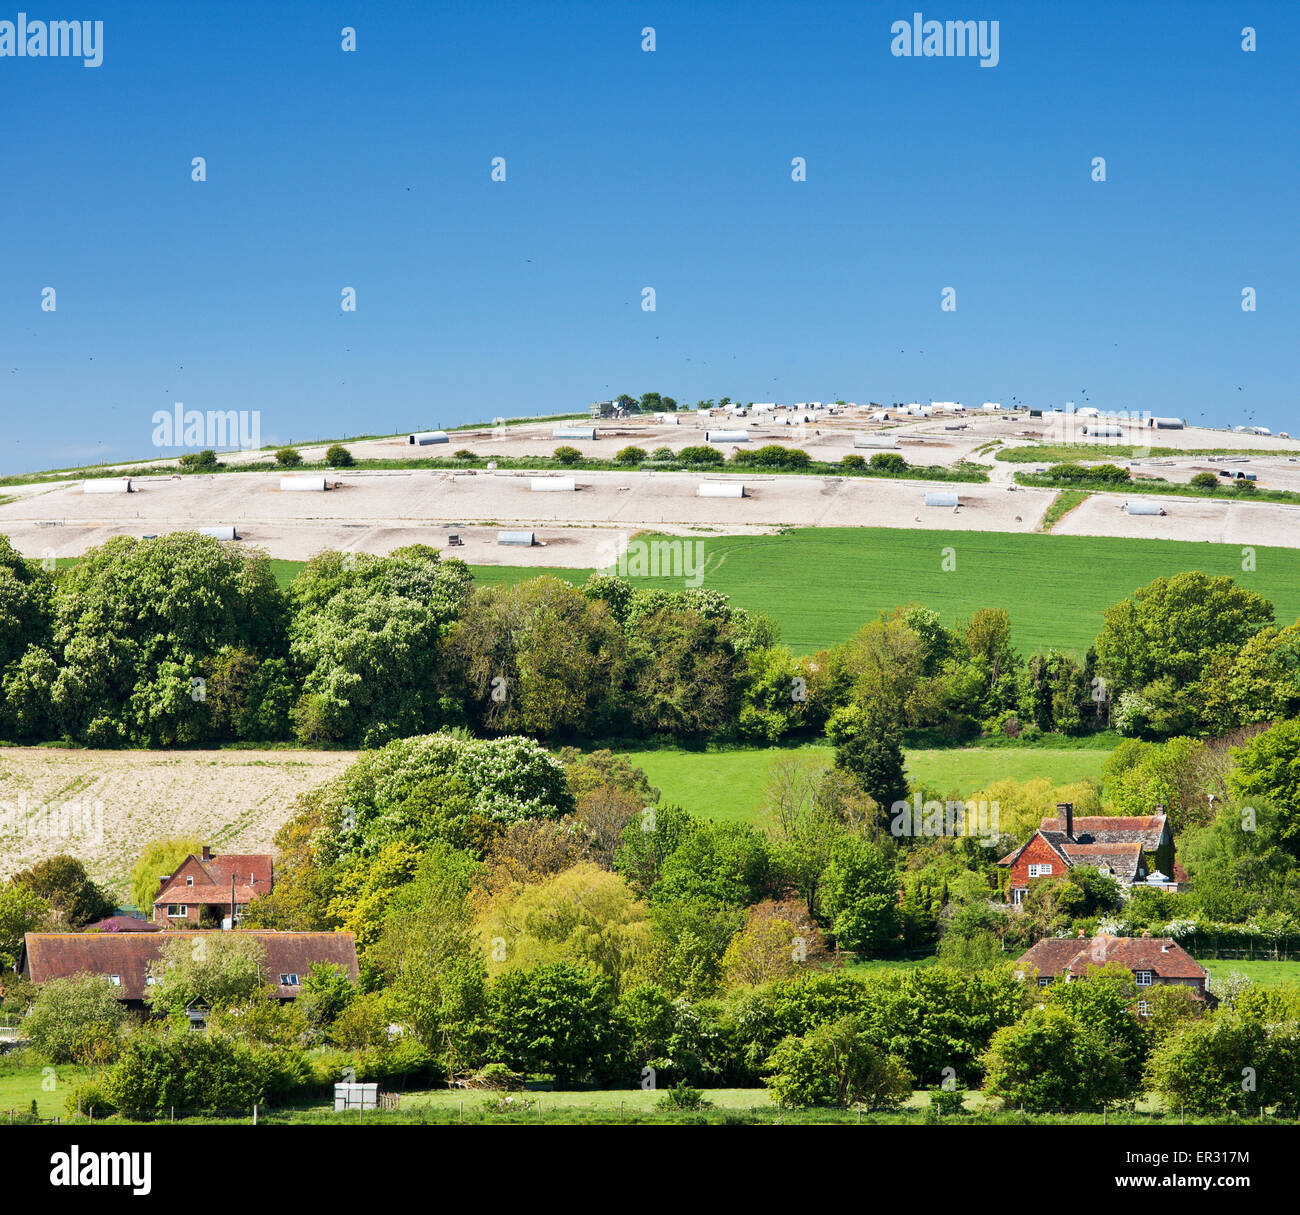 Red Gate ferme porcine, Annington Hill, South Downs Way, Worthing, West Sussex, Angleterre, Royaume-Uni. Banque D'Images